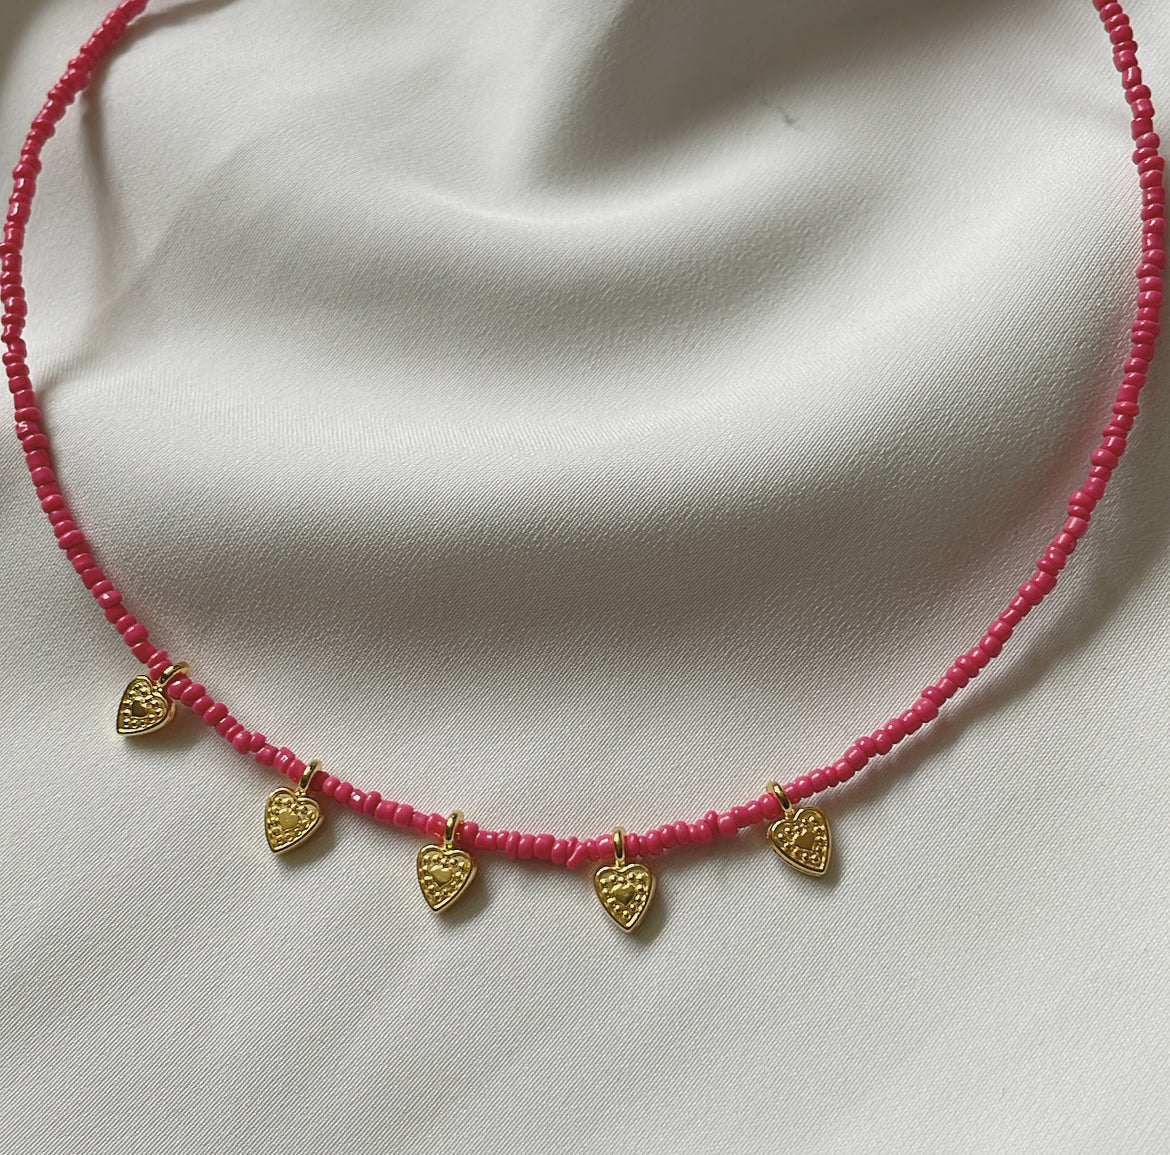 ‘PINK HEART’ necklace